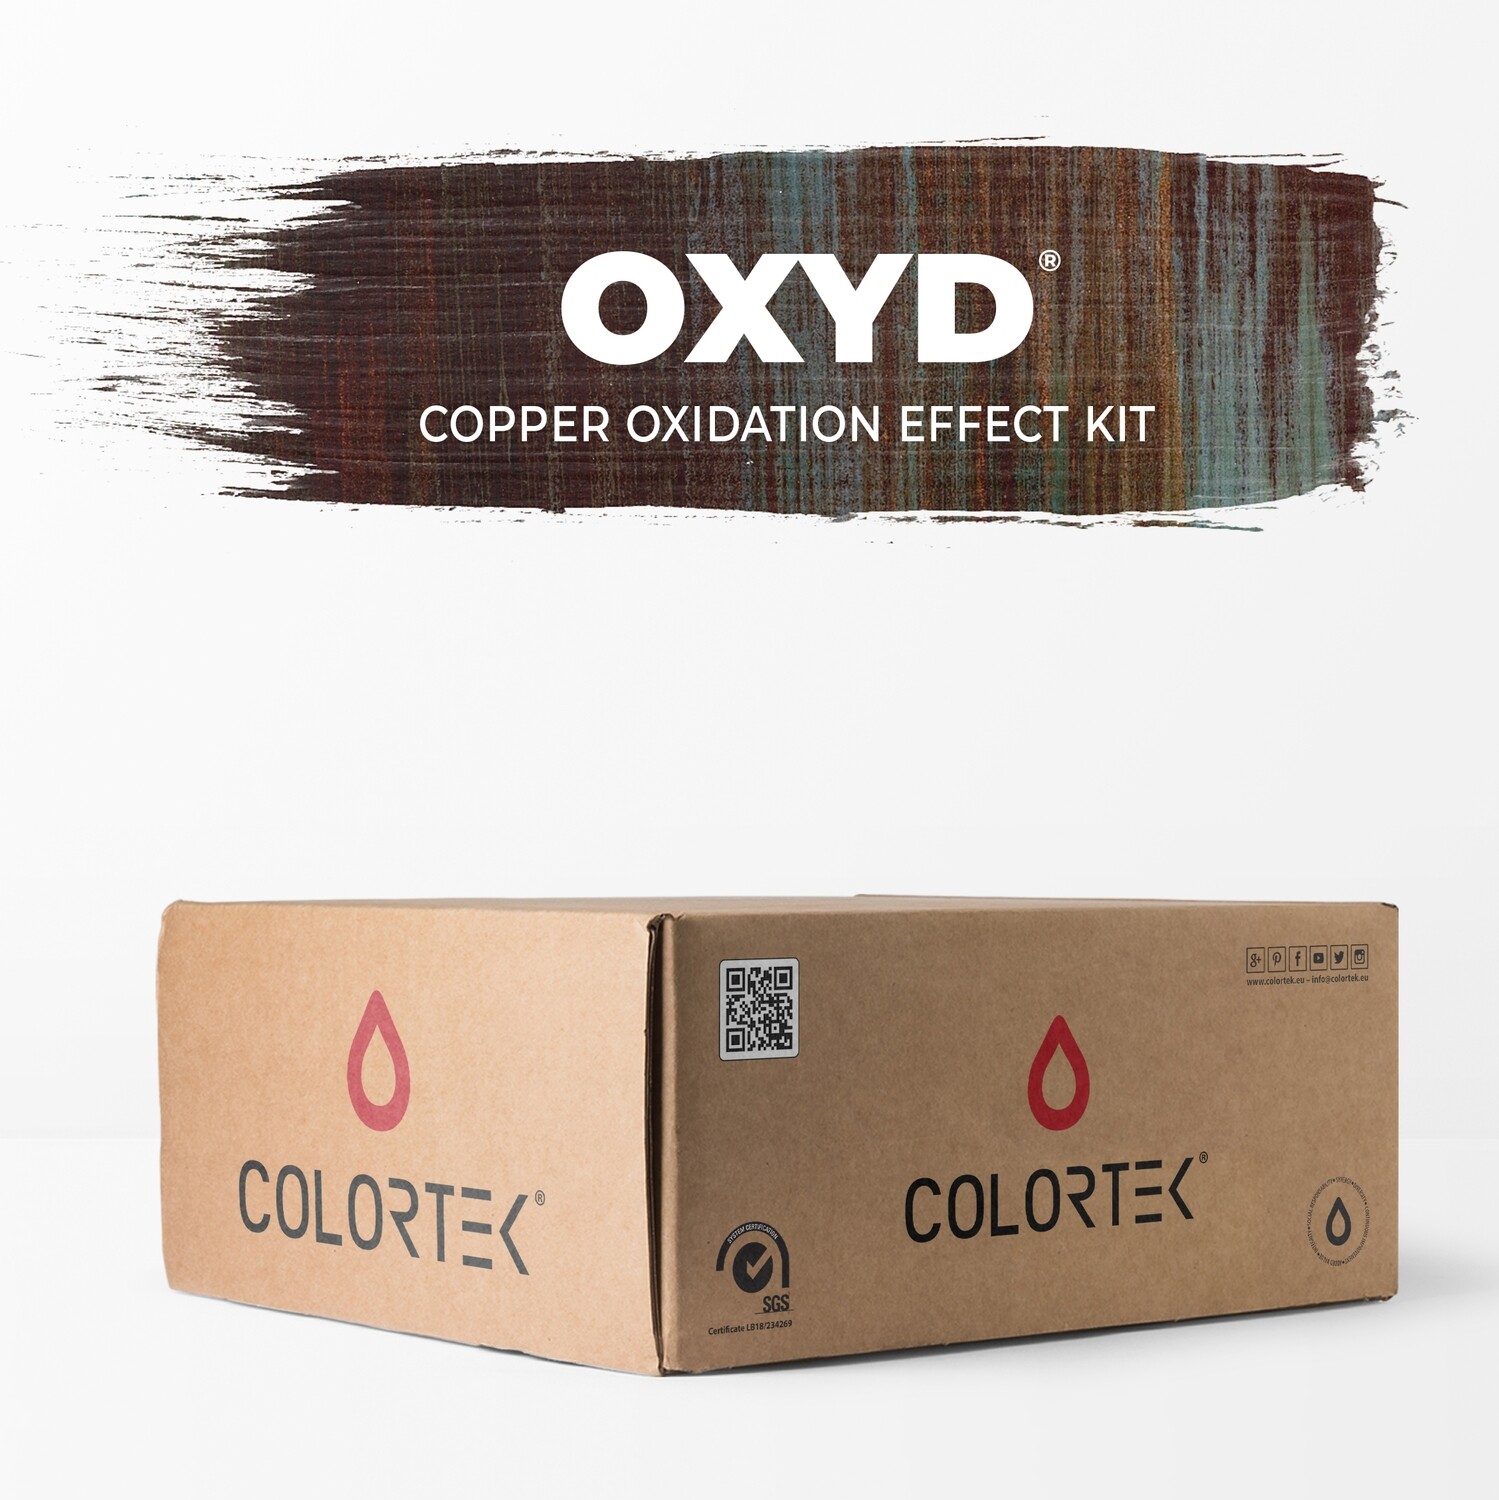 Oxyd - Copper Oxidation Effect Paint Kit 5 sqm